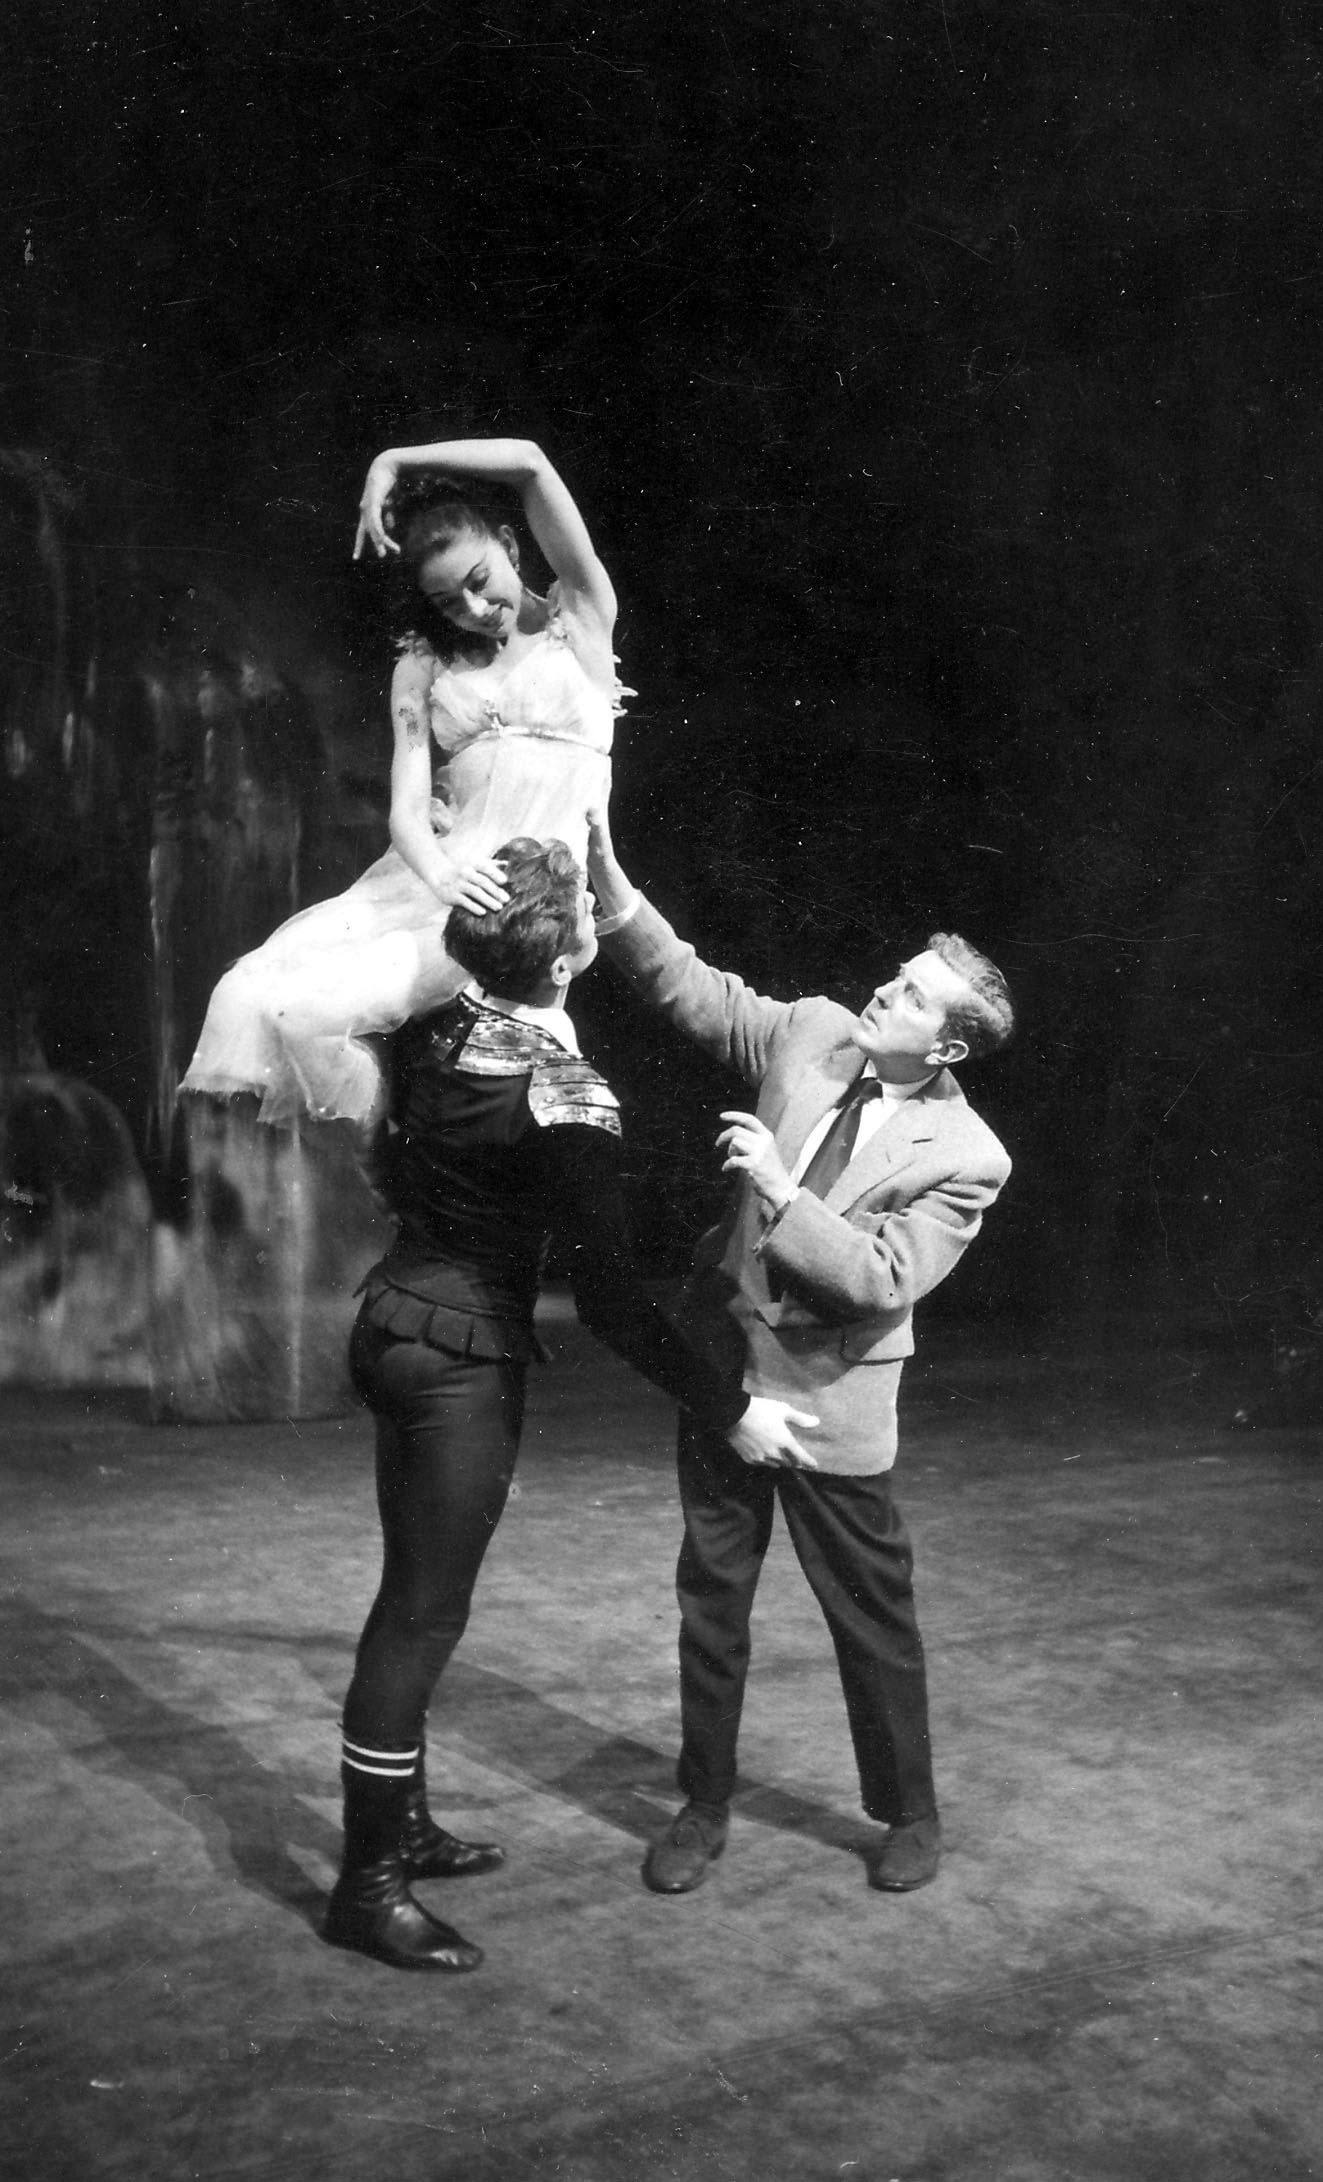 Frederick Ashton directing Margot Fonteyn and Michael Somes in rehearsal for Ondine, October 1958. Photo by GBL Wilson, © Royal Academy of Dance / ArenaPAL